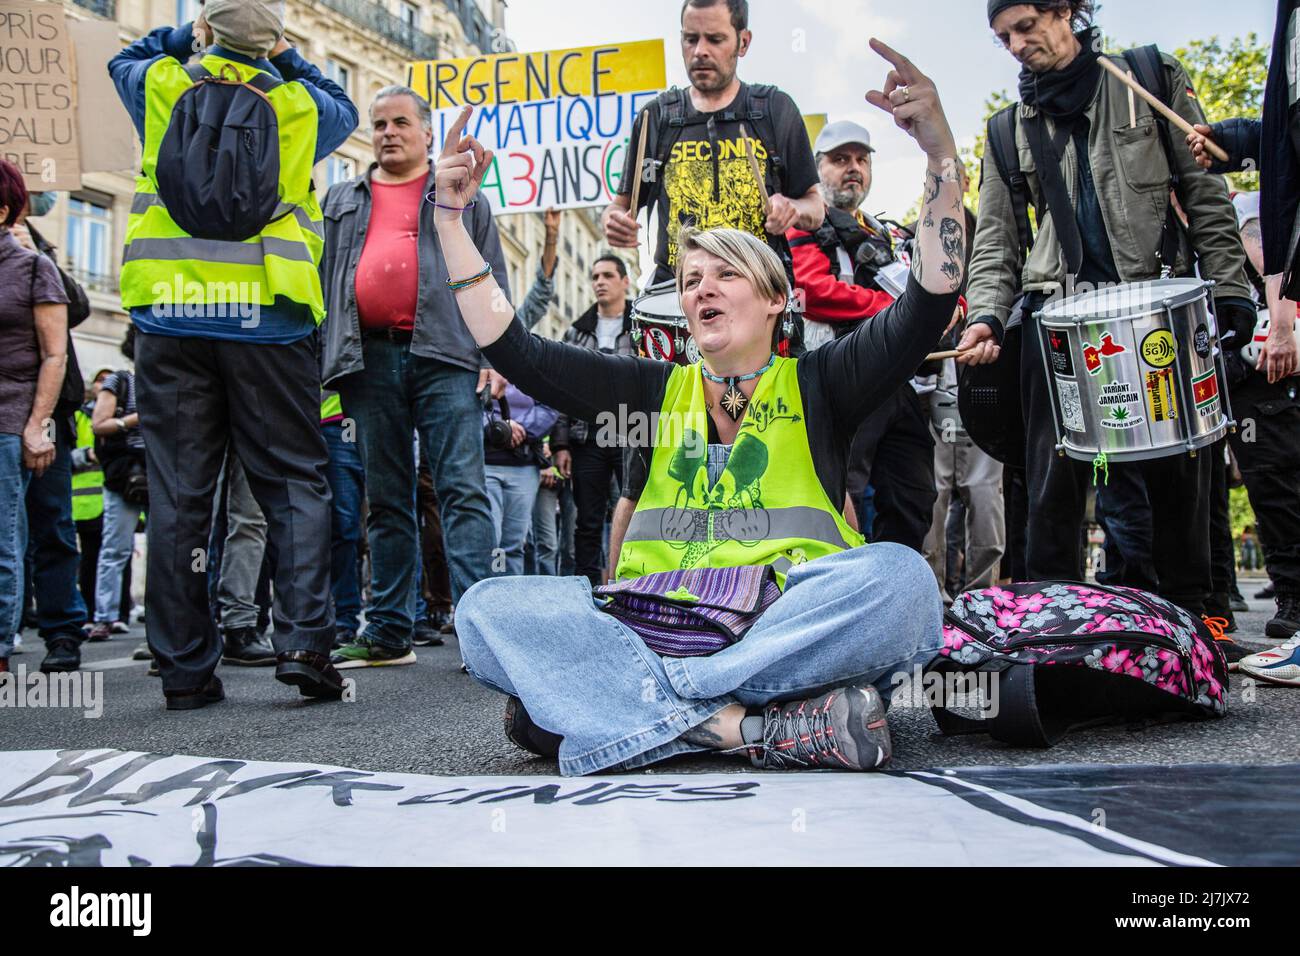 EDITORS NOTE: Image contains profanity)A yellow vest woman is seen  gesturing toward the police during the demonstration against the French  president Emmanuel Macron and the Citizen Initiated Referendum (RIC in  french). Hundreds